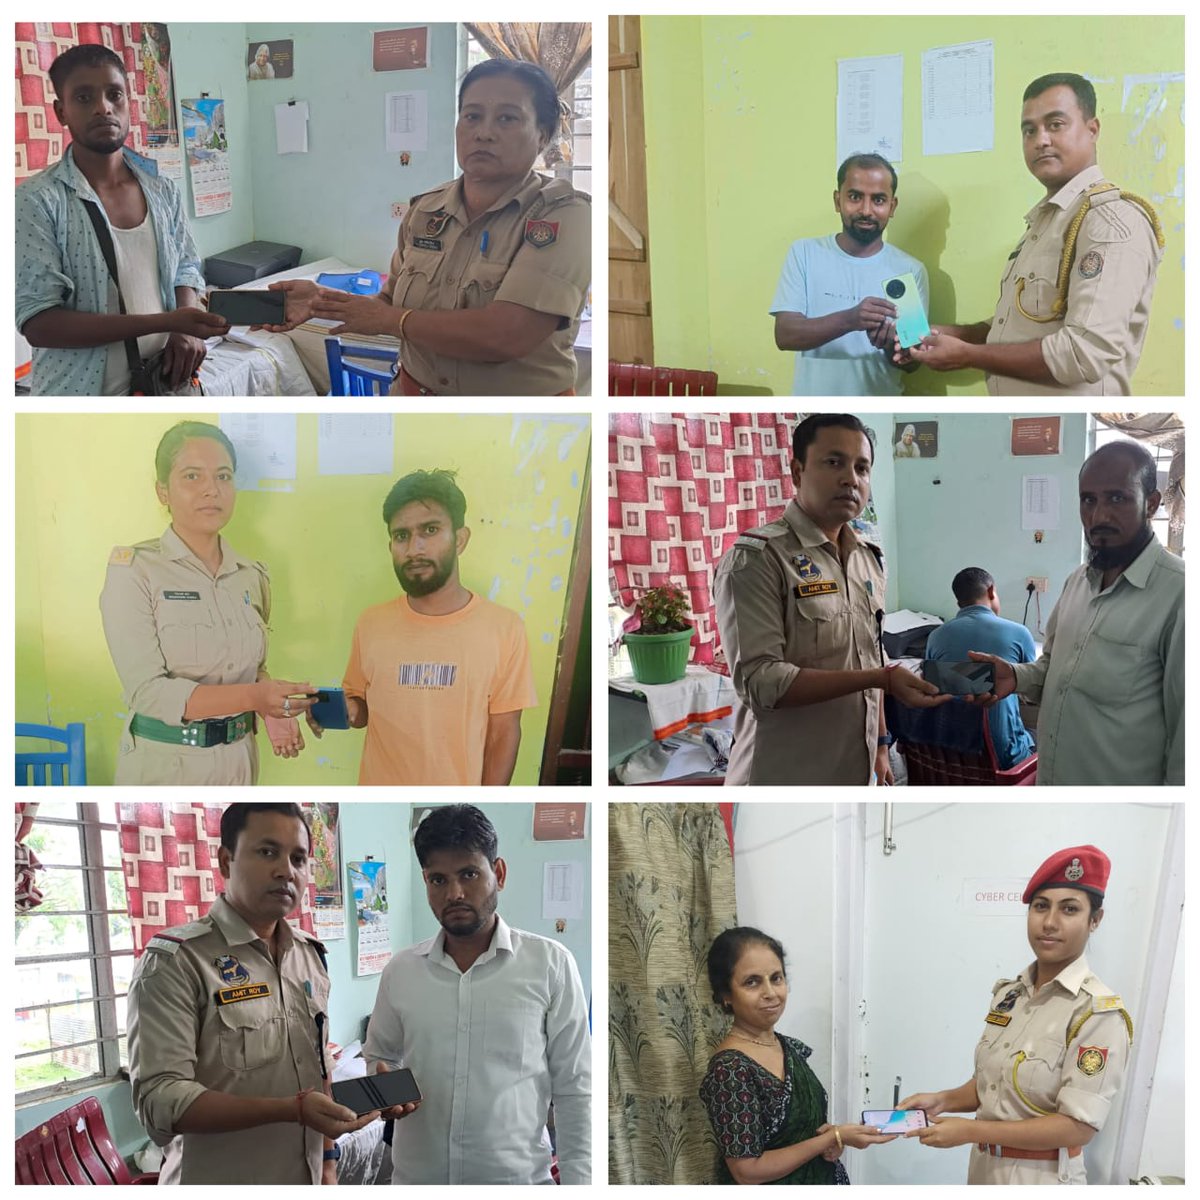 #WeCare Another set of lost mobile phones recovered and handed over to their rightful owners.Please register your complain against stolen/Lost phones in Assam Police Seva Setu or CEIR portal. @CMOfficeAssam @assampolice @DGPAssamPolice @gpsinghips @HardiSpeaks @KangkanJSaikia